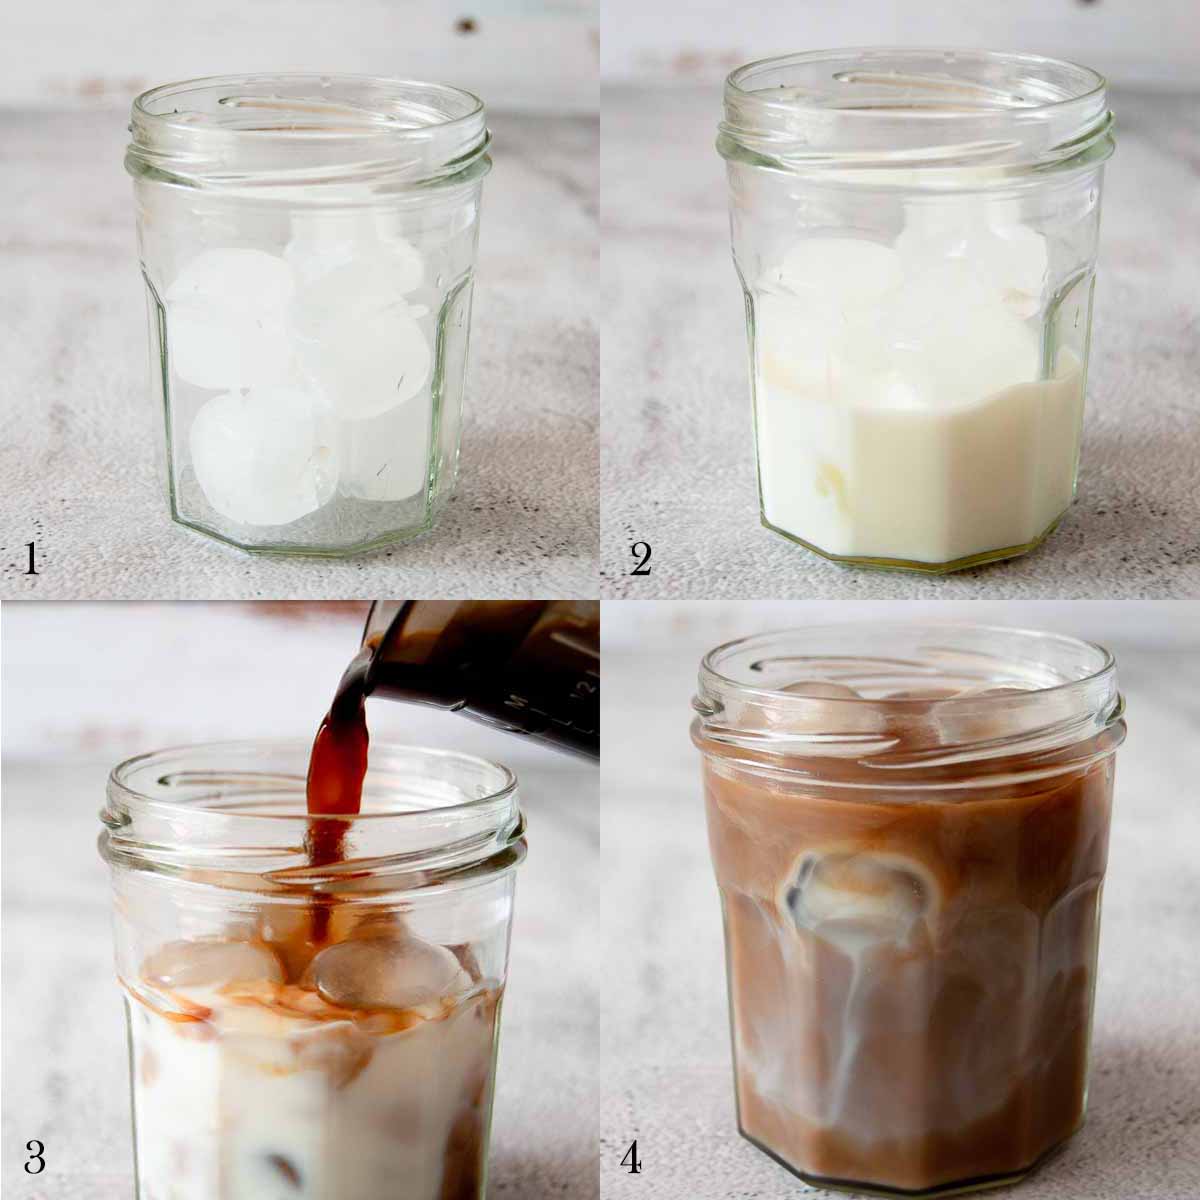 A collage of four photos showing how to make iced coffee. First photo shows ice in a jar. Second photo shows the same jar with ice and milk. Third photo shows coffee being poured to the jar with ice and milk. And the final photo shows iced coffee blended with milk.